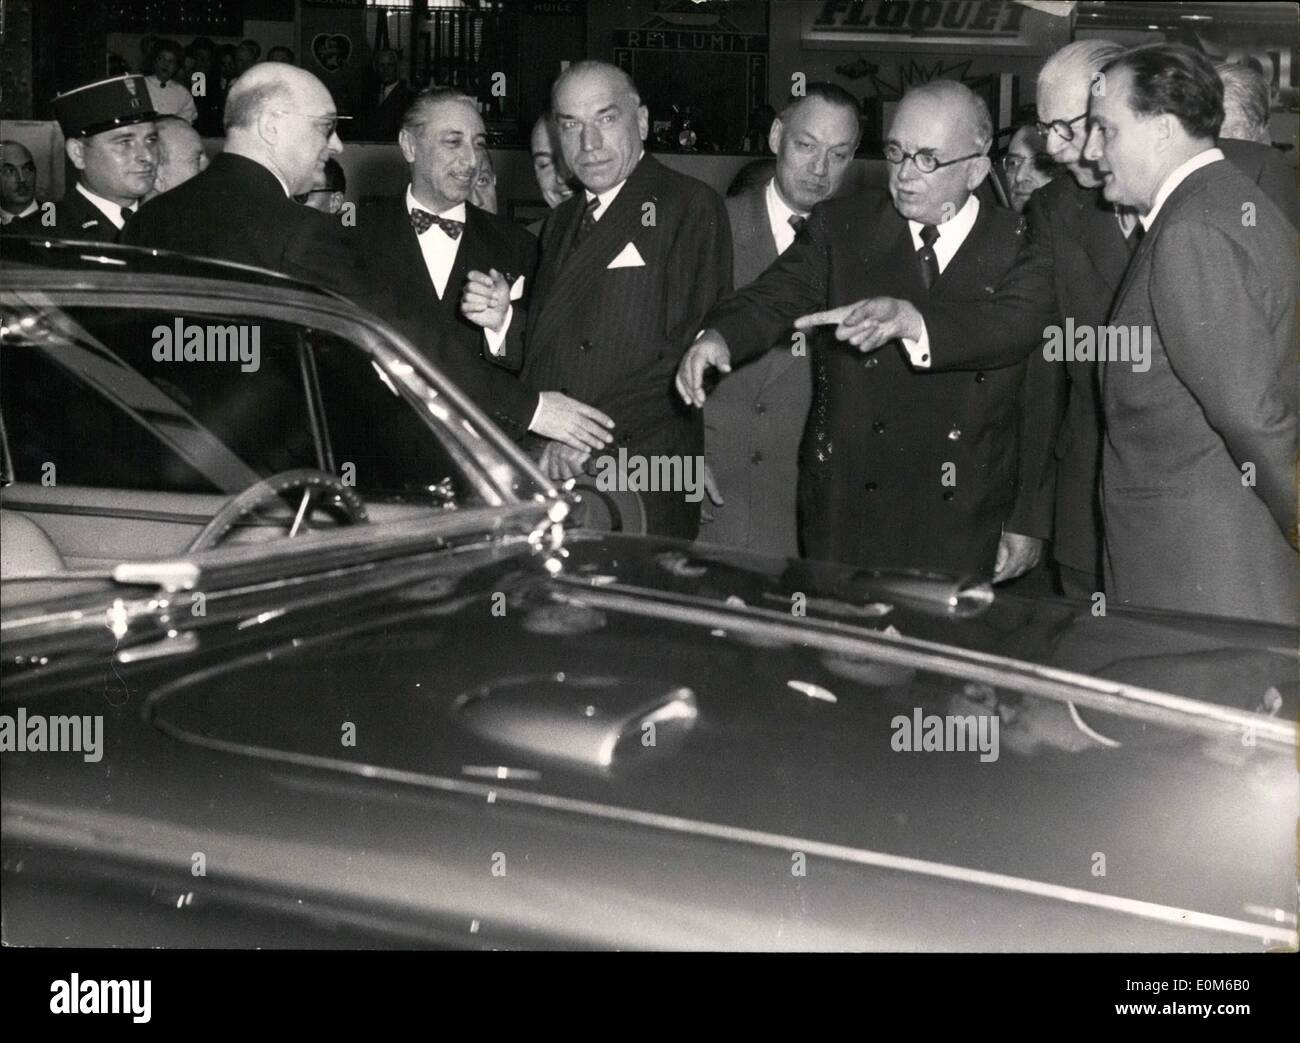 Oct. 10, 1953 - President auriol visits Paris motor show : president Vincent Auriol escorted, and M. Louvel, minister of industry, visits motor show which opened at the grand palais, Paris, yesterday. Stock Photo